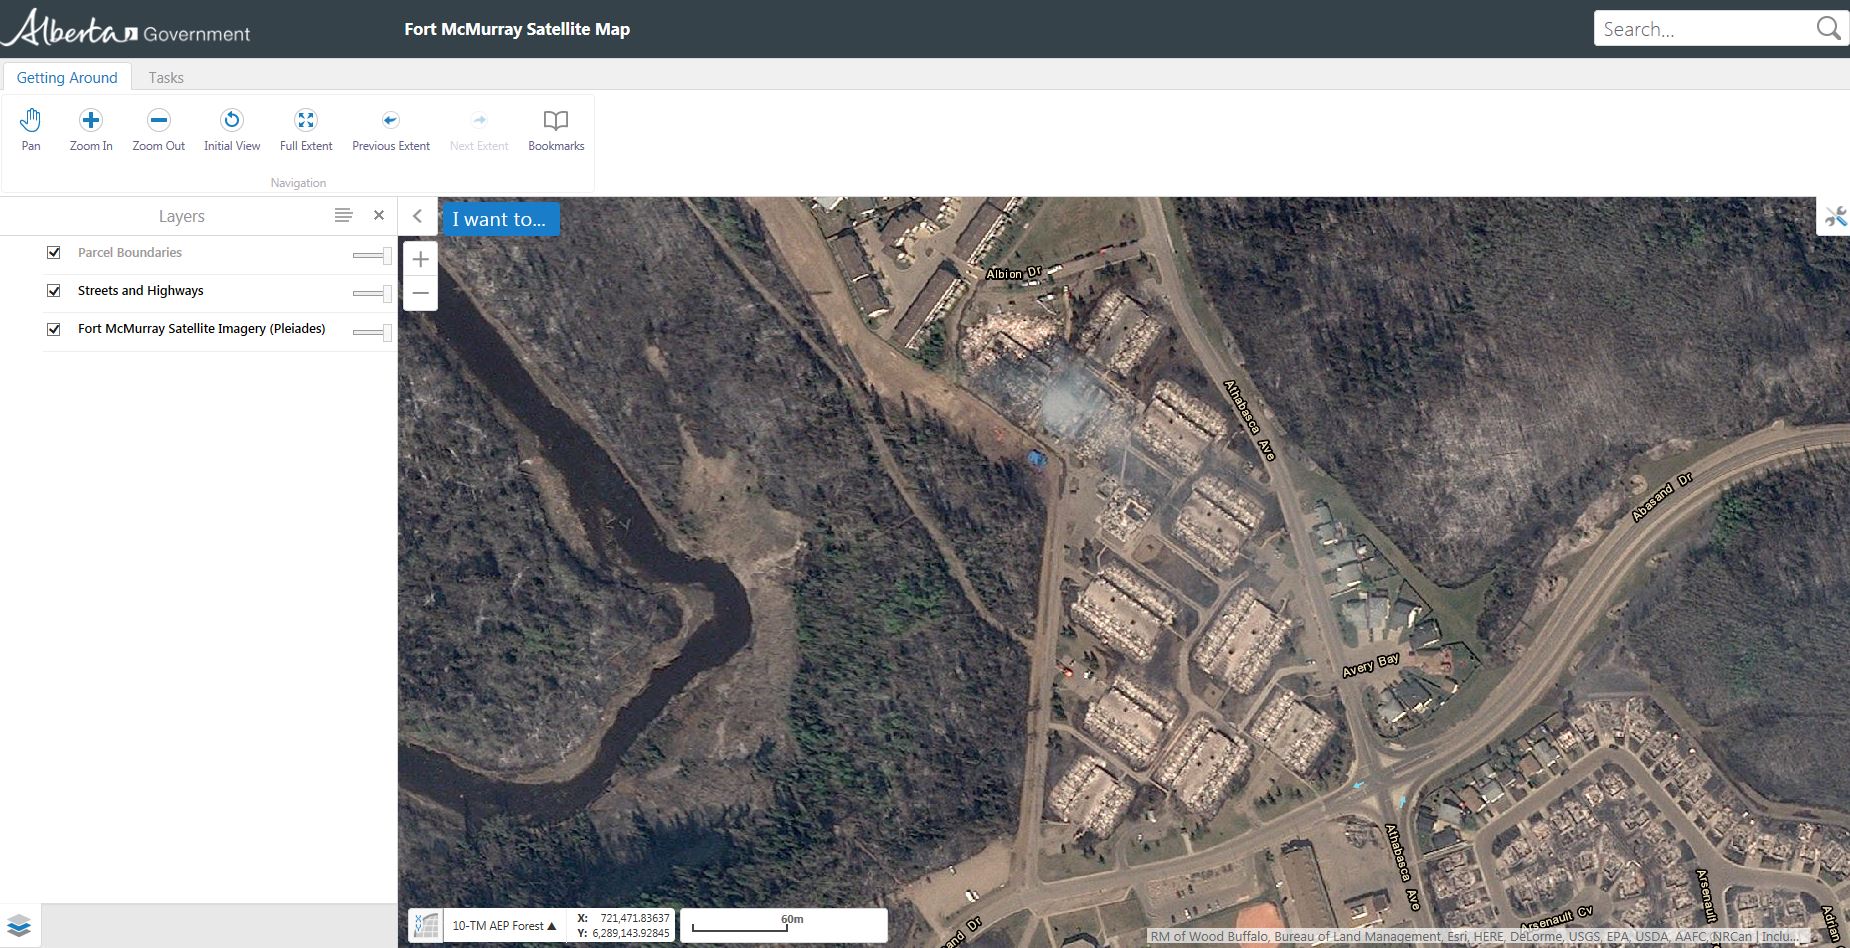 Fort Mc Murray - Government Alberta - Wild fires - GIS application - satellite Pleiades - SIG - Burnt areas - Dommages - Zones brulées